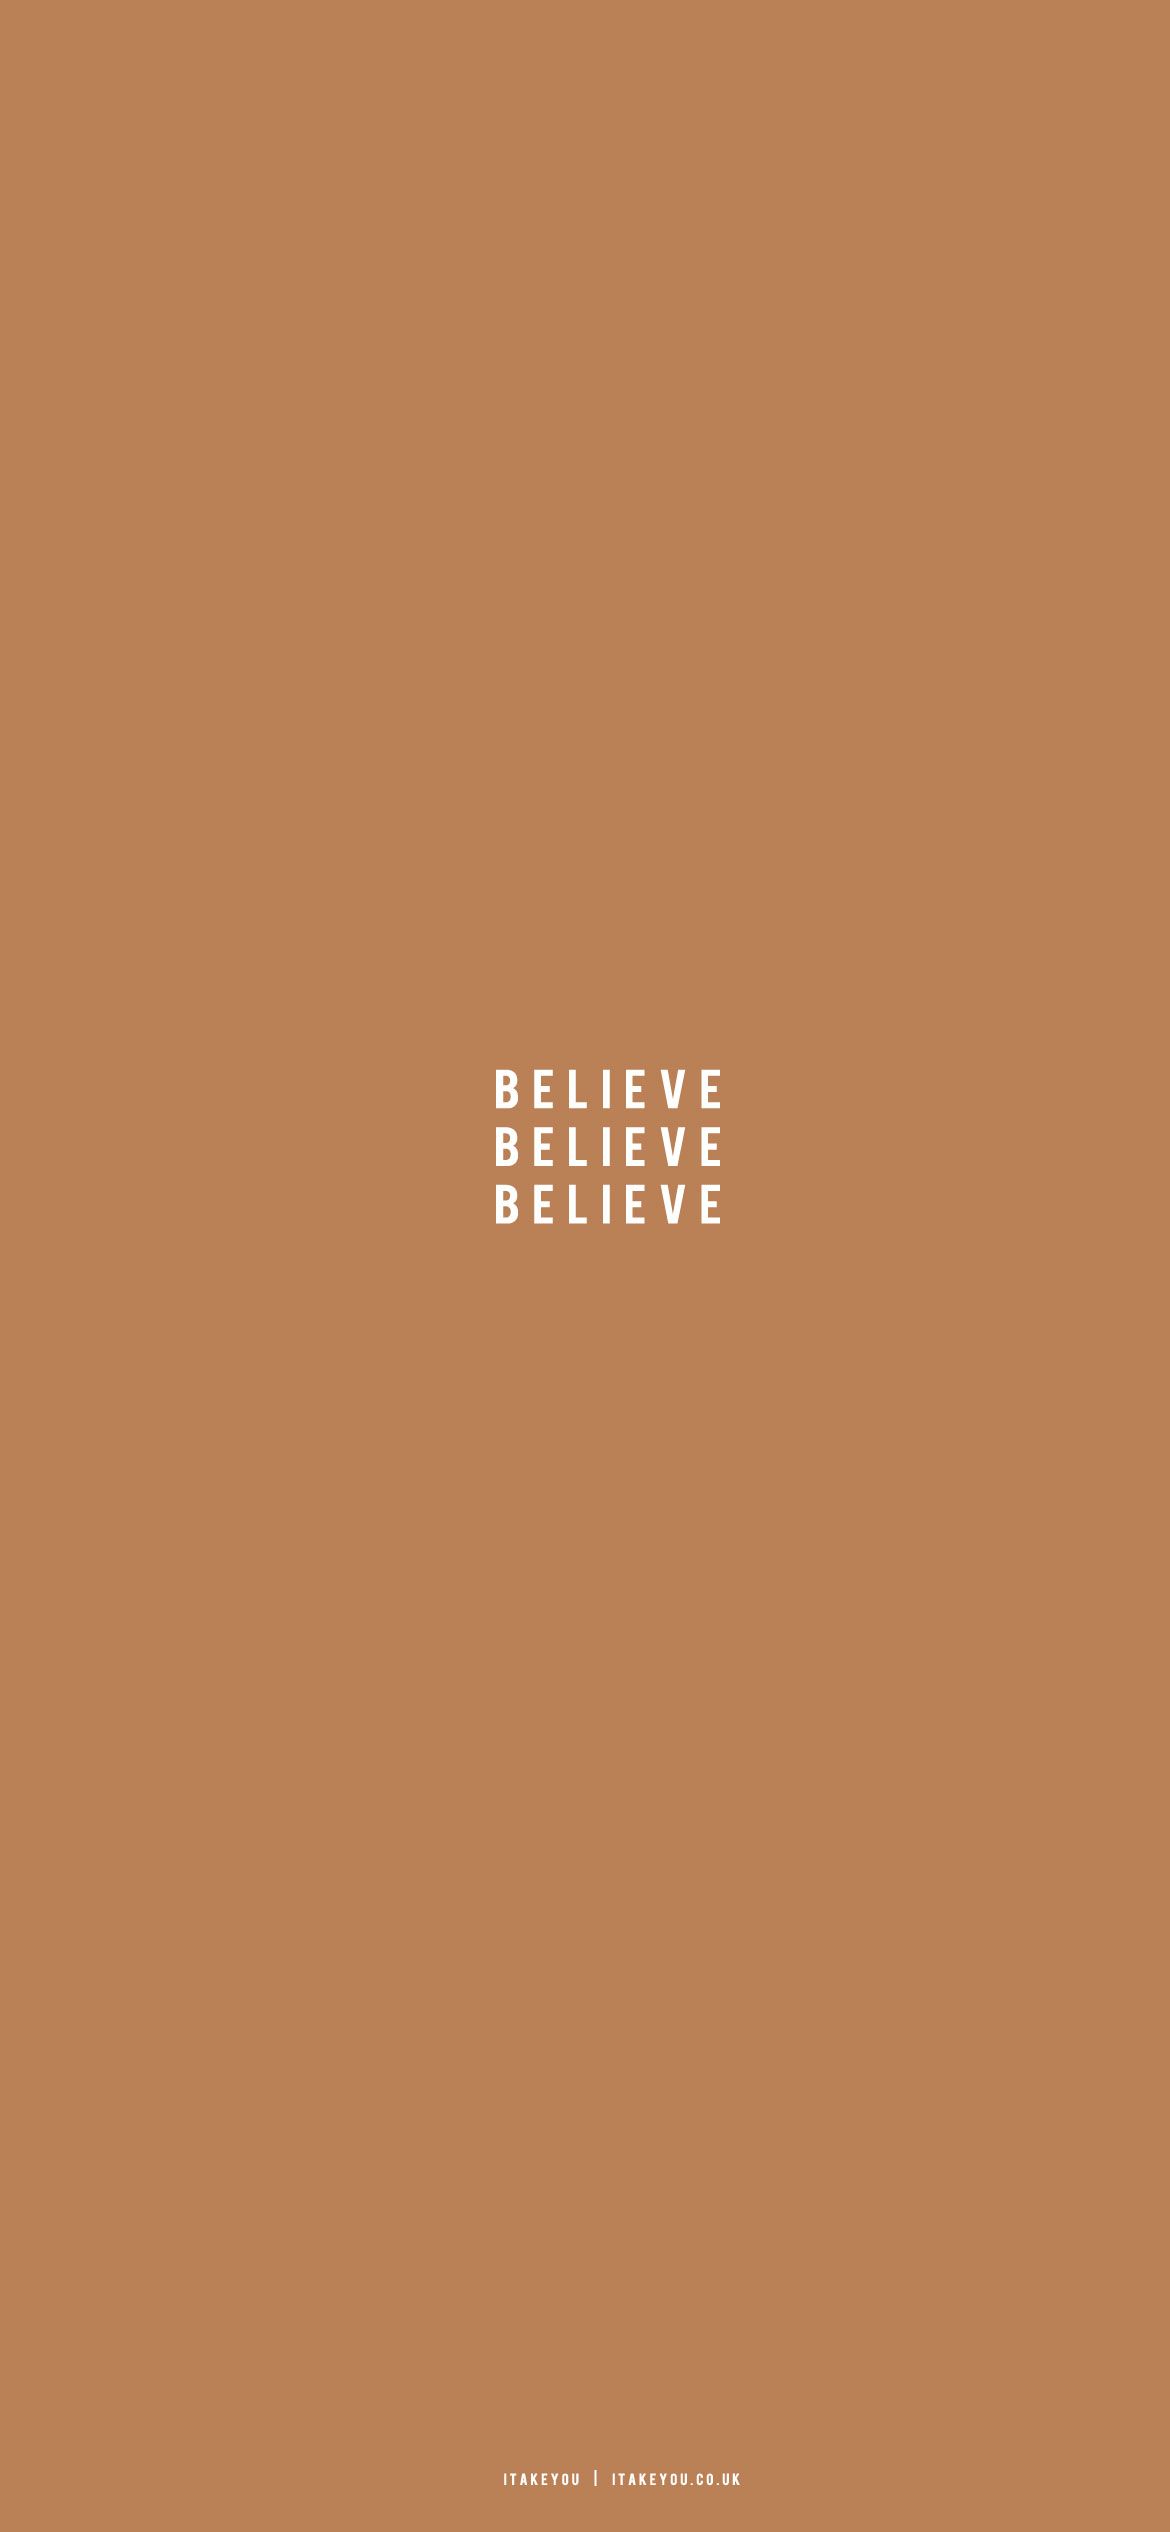 Minimalist Brown Wallpaper iPhone Ideas for iPhone : Believe I Take You. Wedding Readings. Wedding Ideas